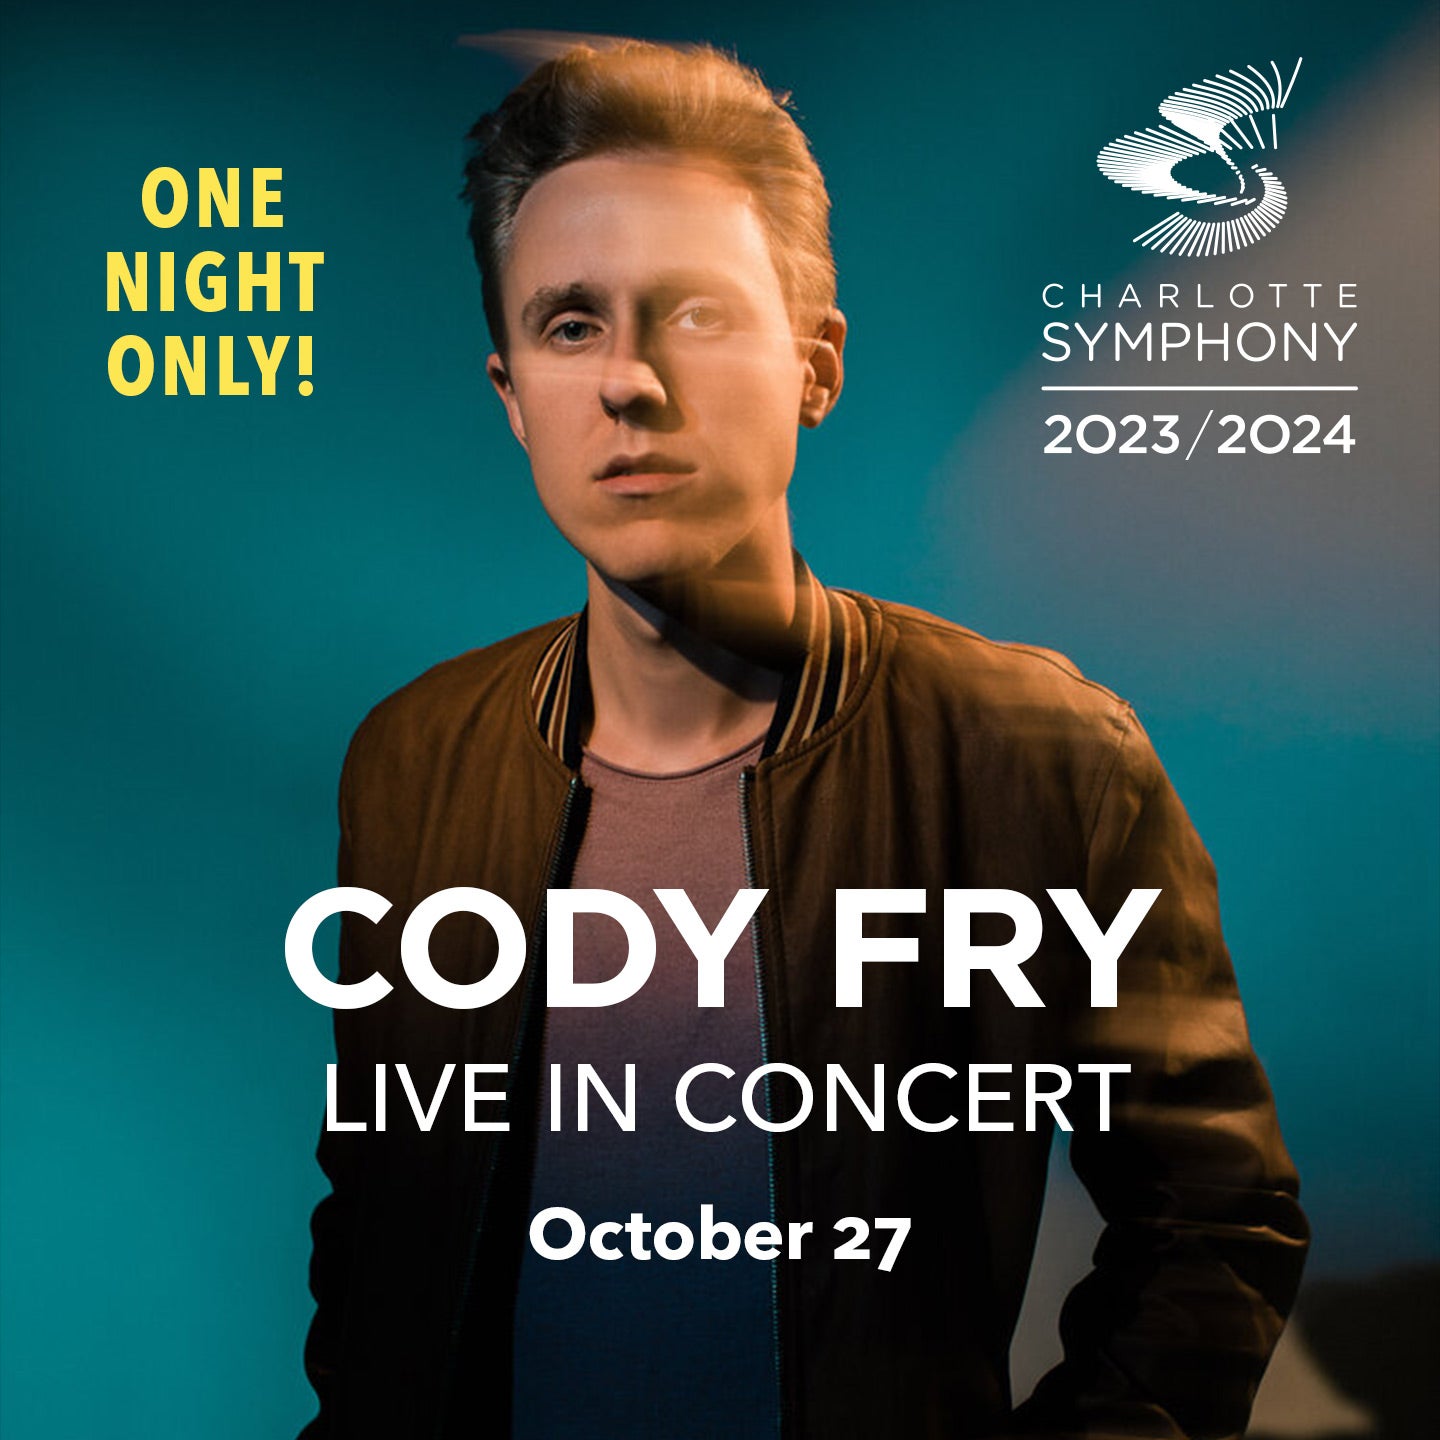 Charlotte Symphony: Cody Fry Live in Concert